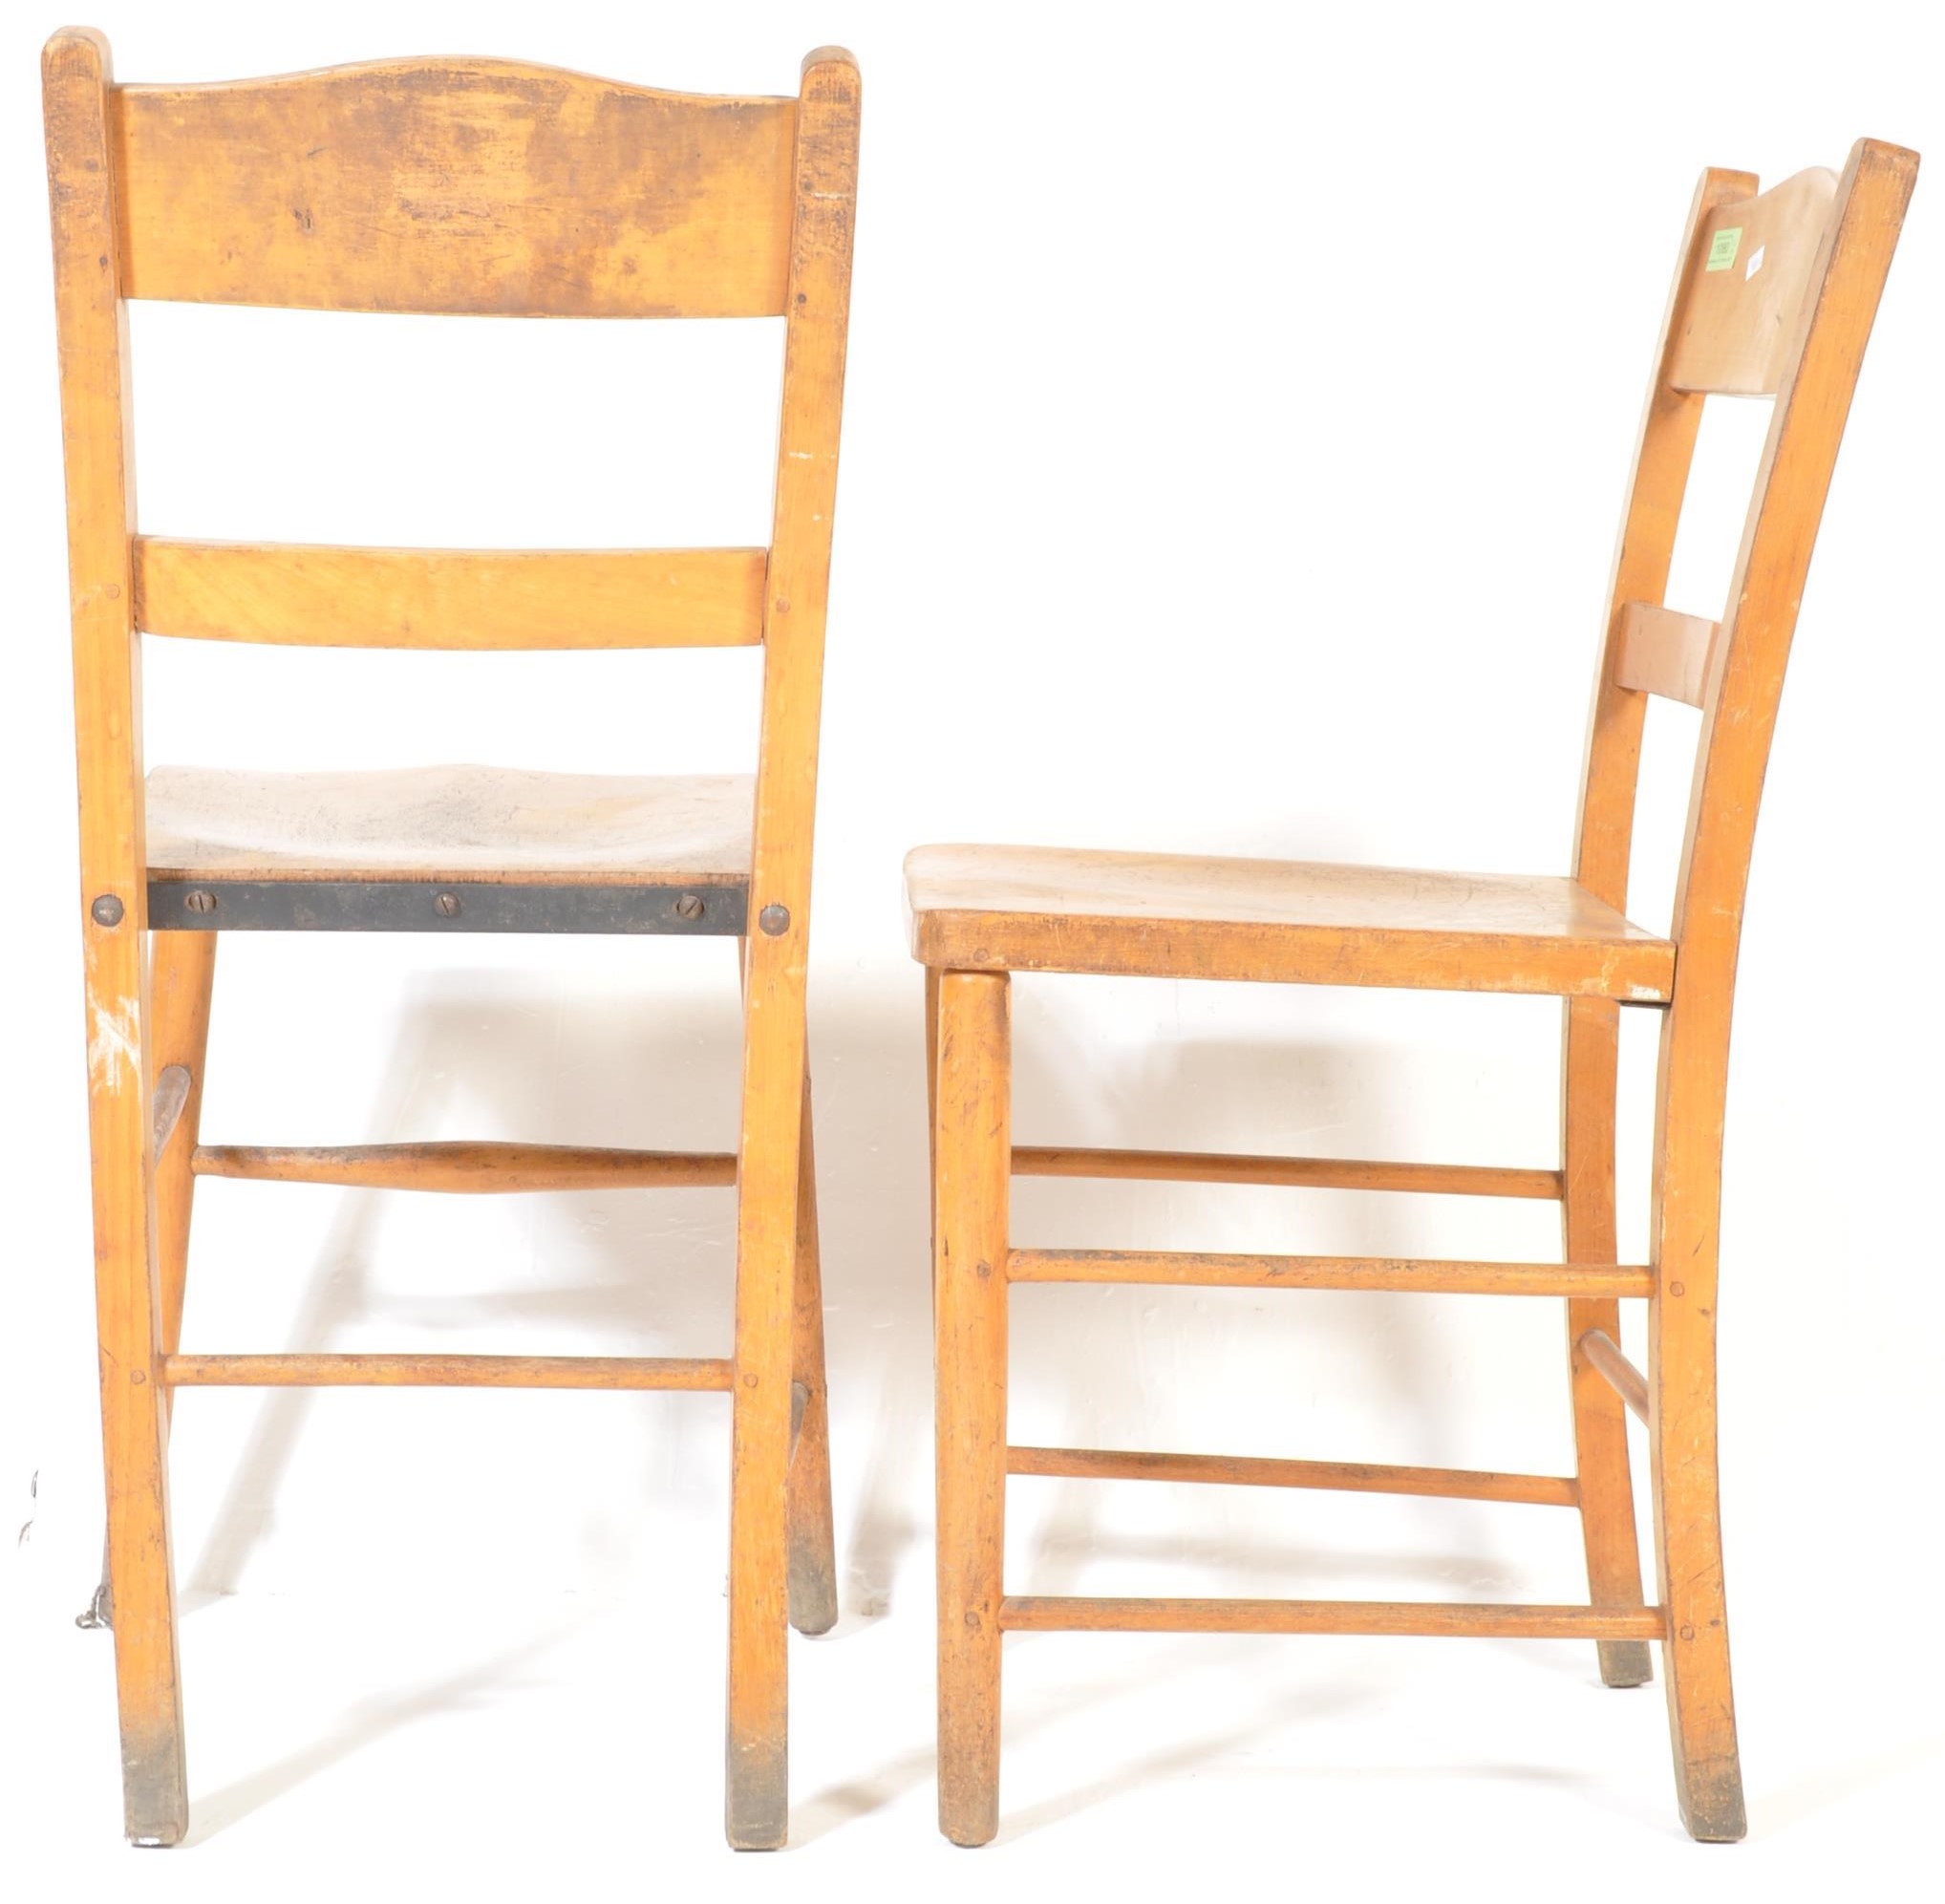 A PAIR OF RETRO VINTAGE 1960'S BEECH AND ELM SCHOOL CHAIRS - Image 7 of 8